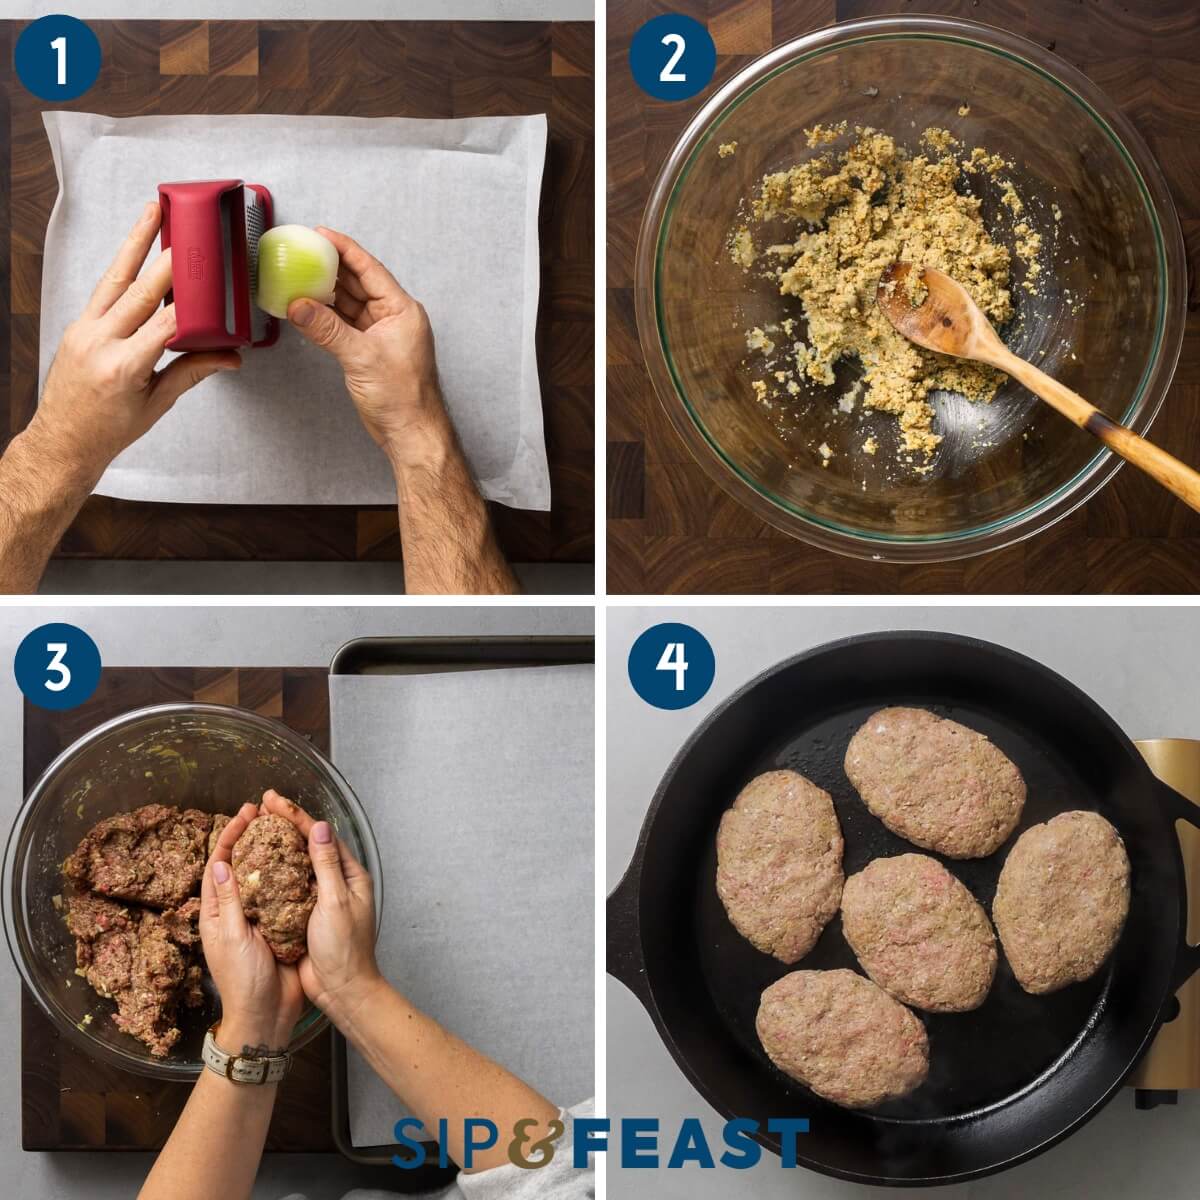 Salisbury steak recipe process collage group number one showing grated onion, making a panade, forming the patties, and searing the patties in a cast iron pan.